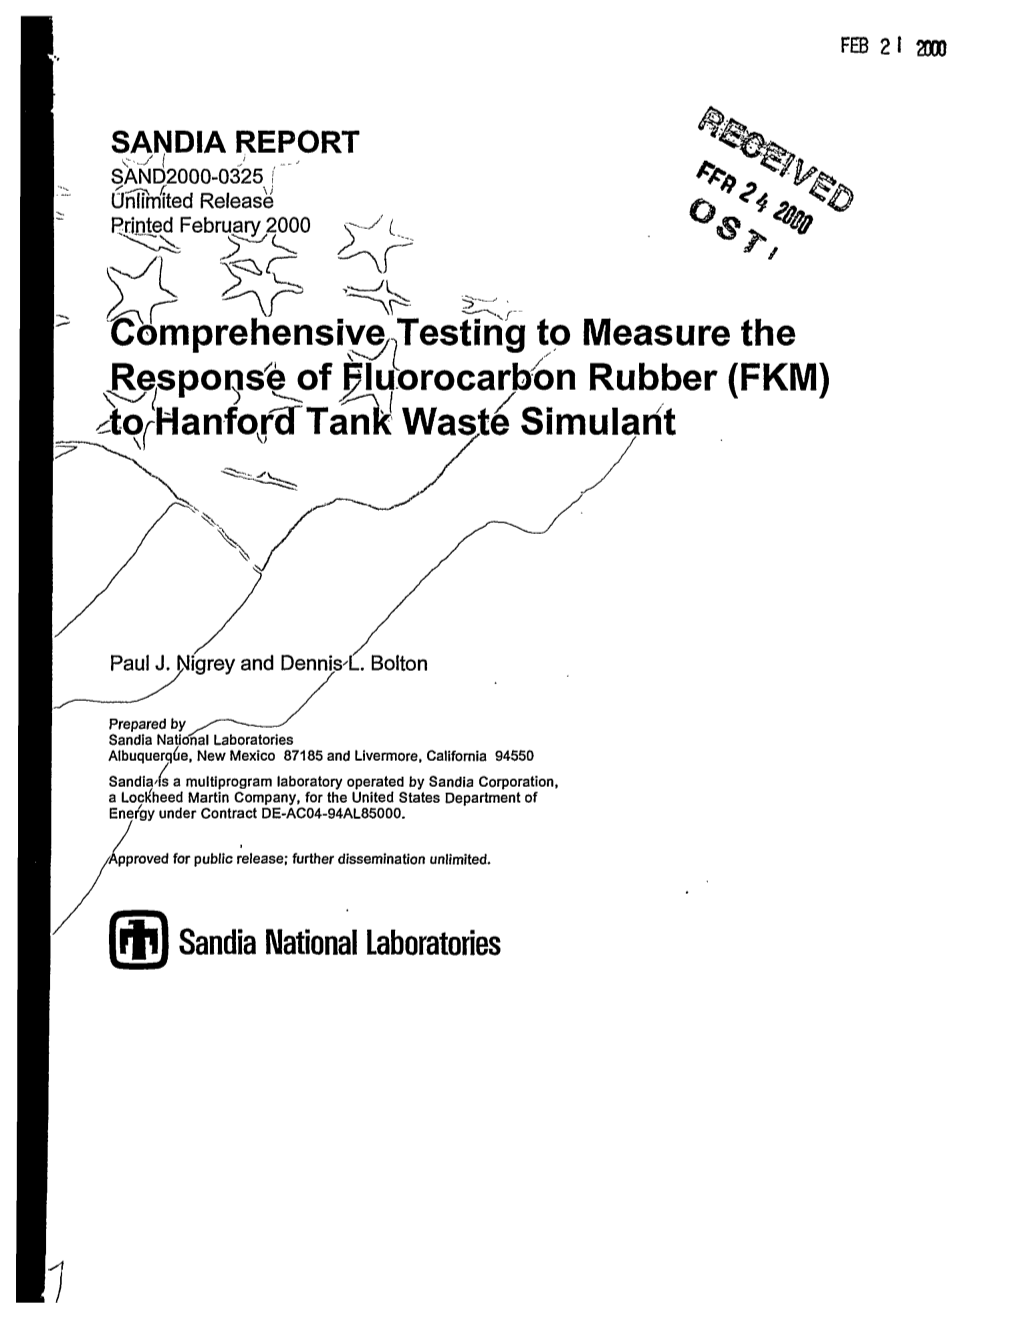 Comprehensive Testing to Measure the Jtespoi^Se^Yf Jhuorocarbdn Rubber (FKM) Whanfomtank1 Waste Simulant